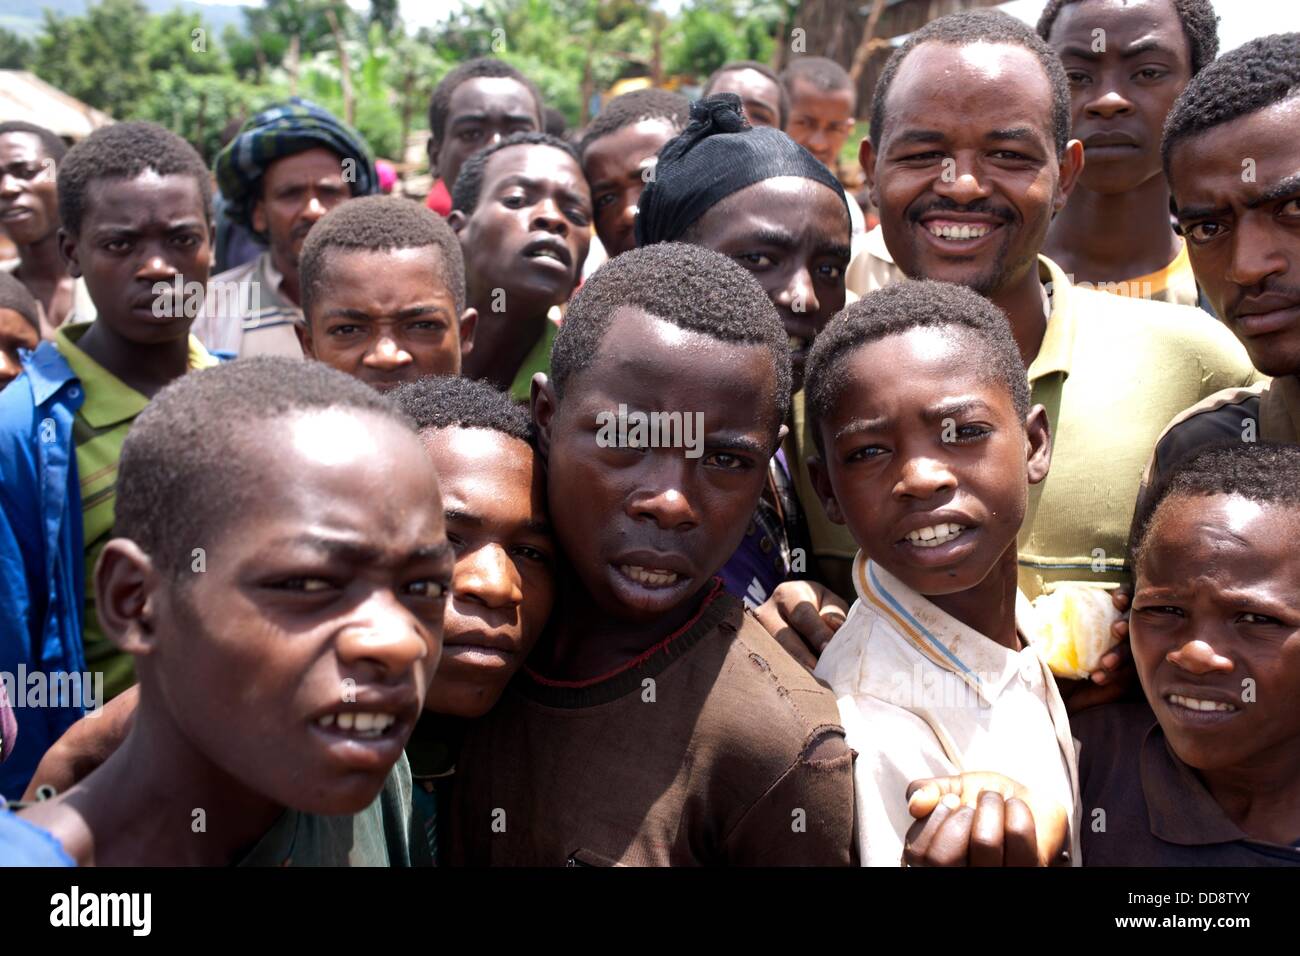 Portraits of large group of people at the market and looking into the camera, Mizan. Stock Photo